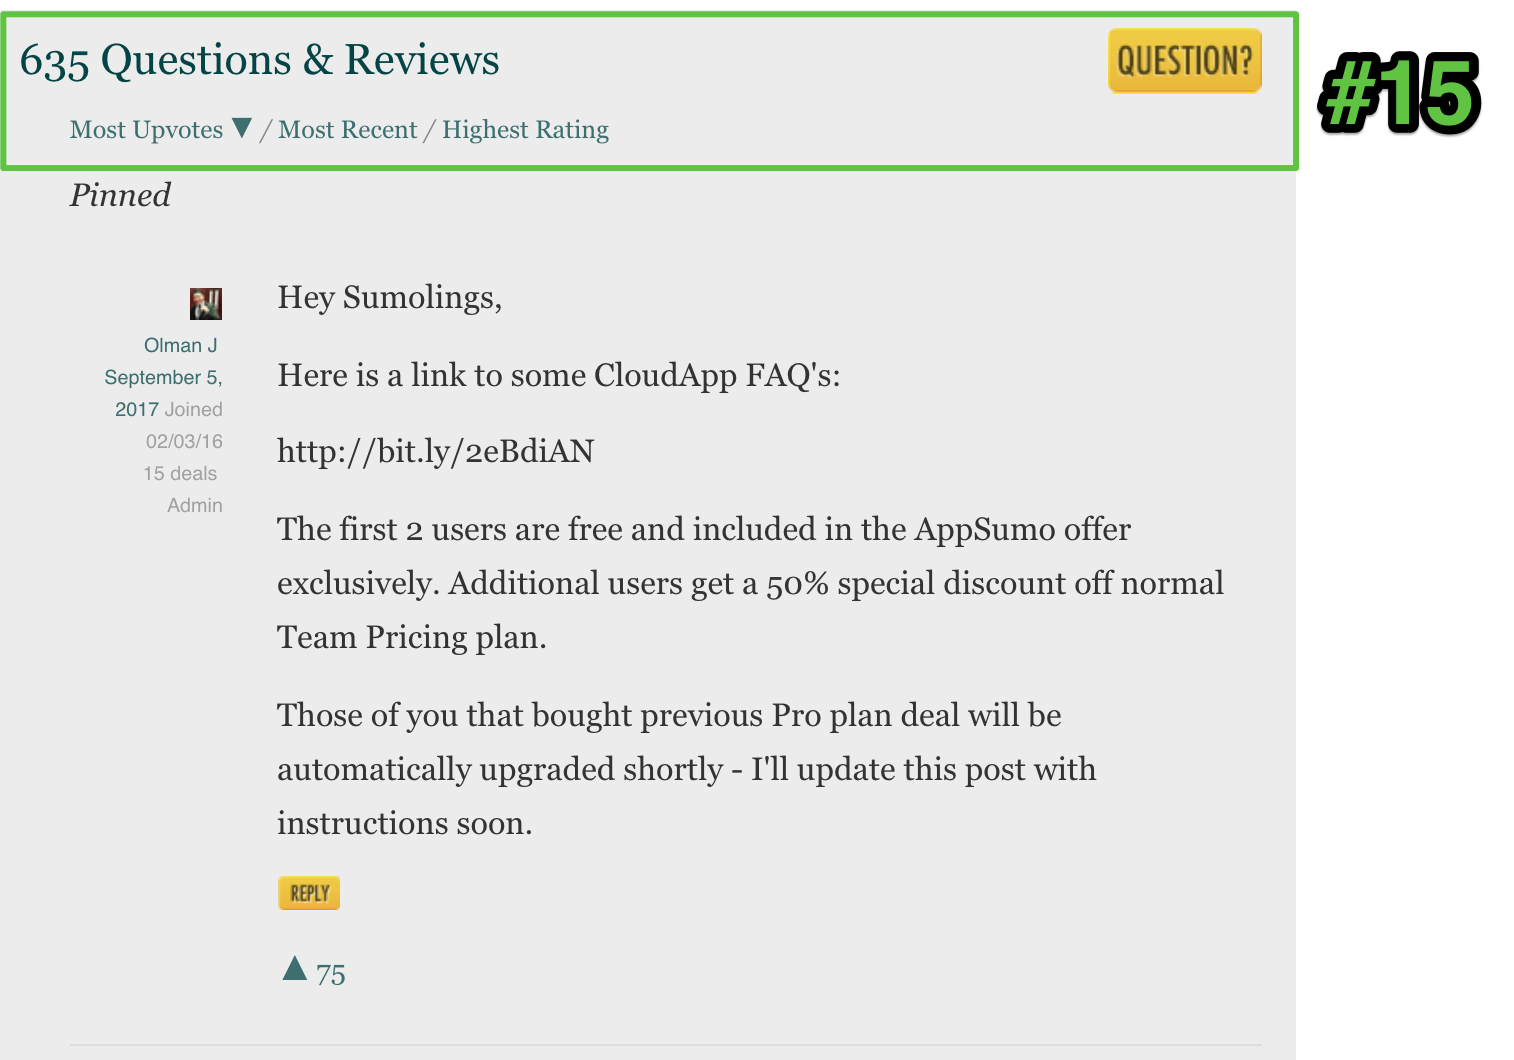 Screenshot showing a review for an appsumo deal